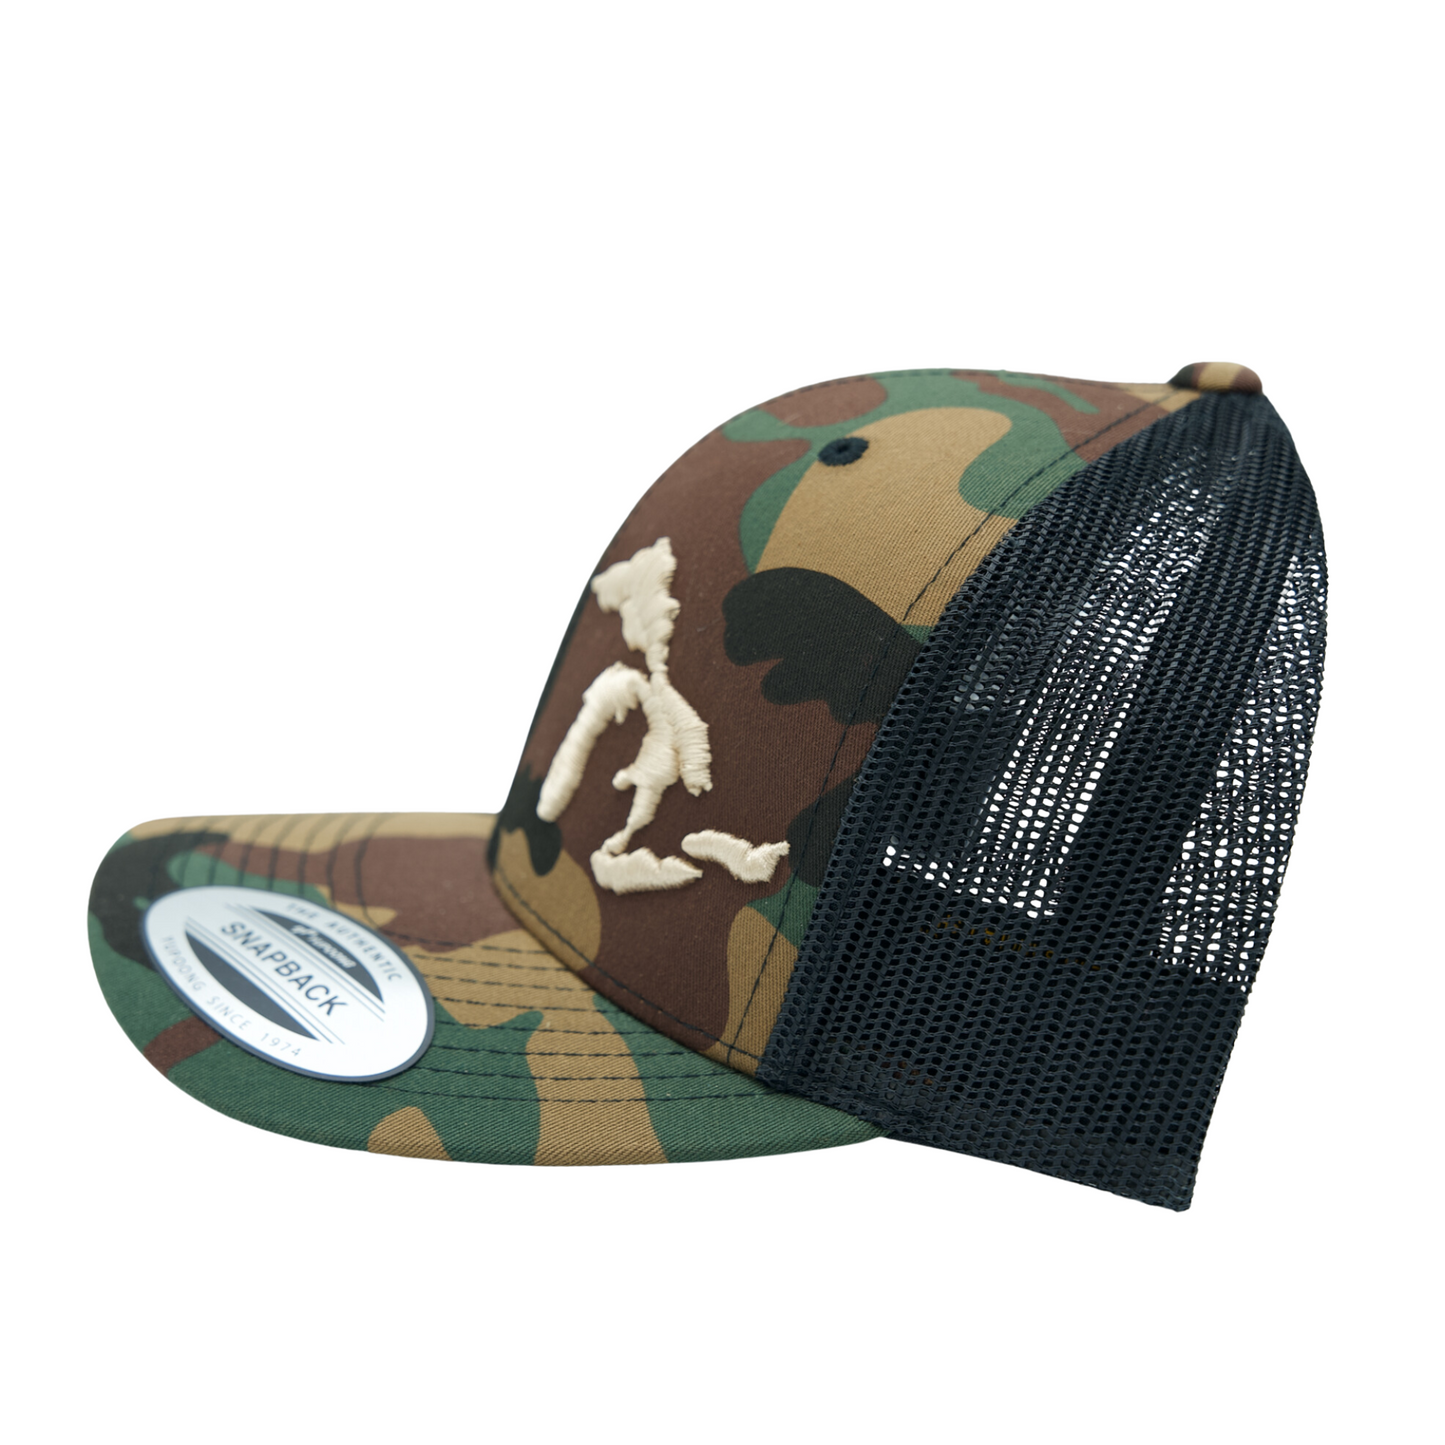 Great Lakes Trucker Hat Camouflage/Black/Tan